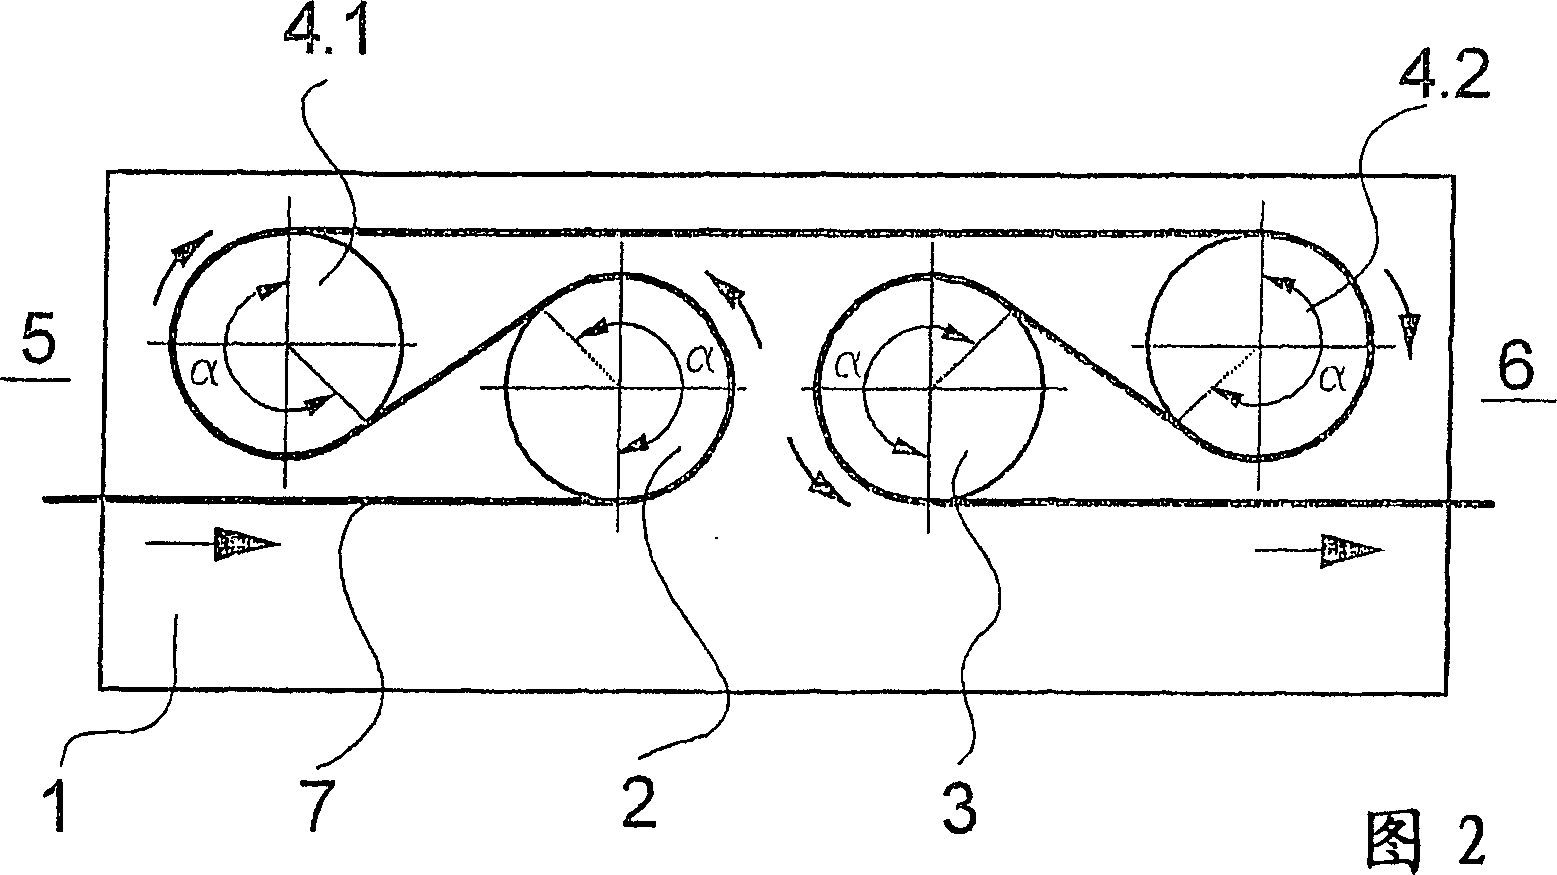 Device for guiding, conveying, or treating a fiber cable